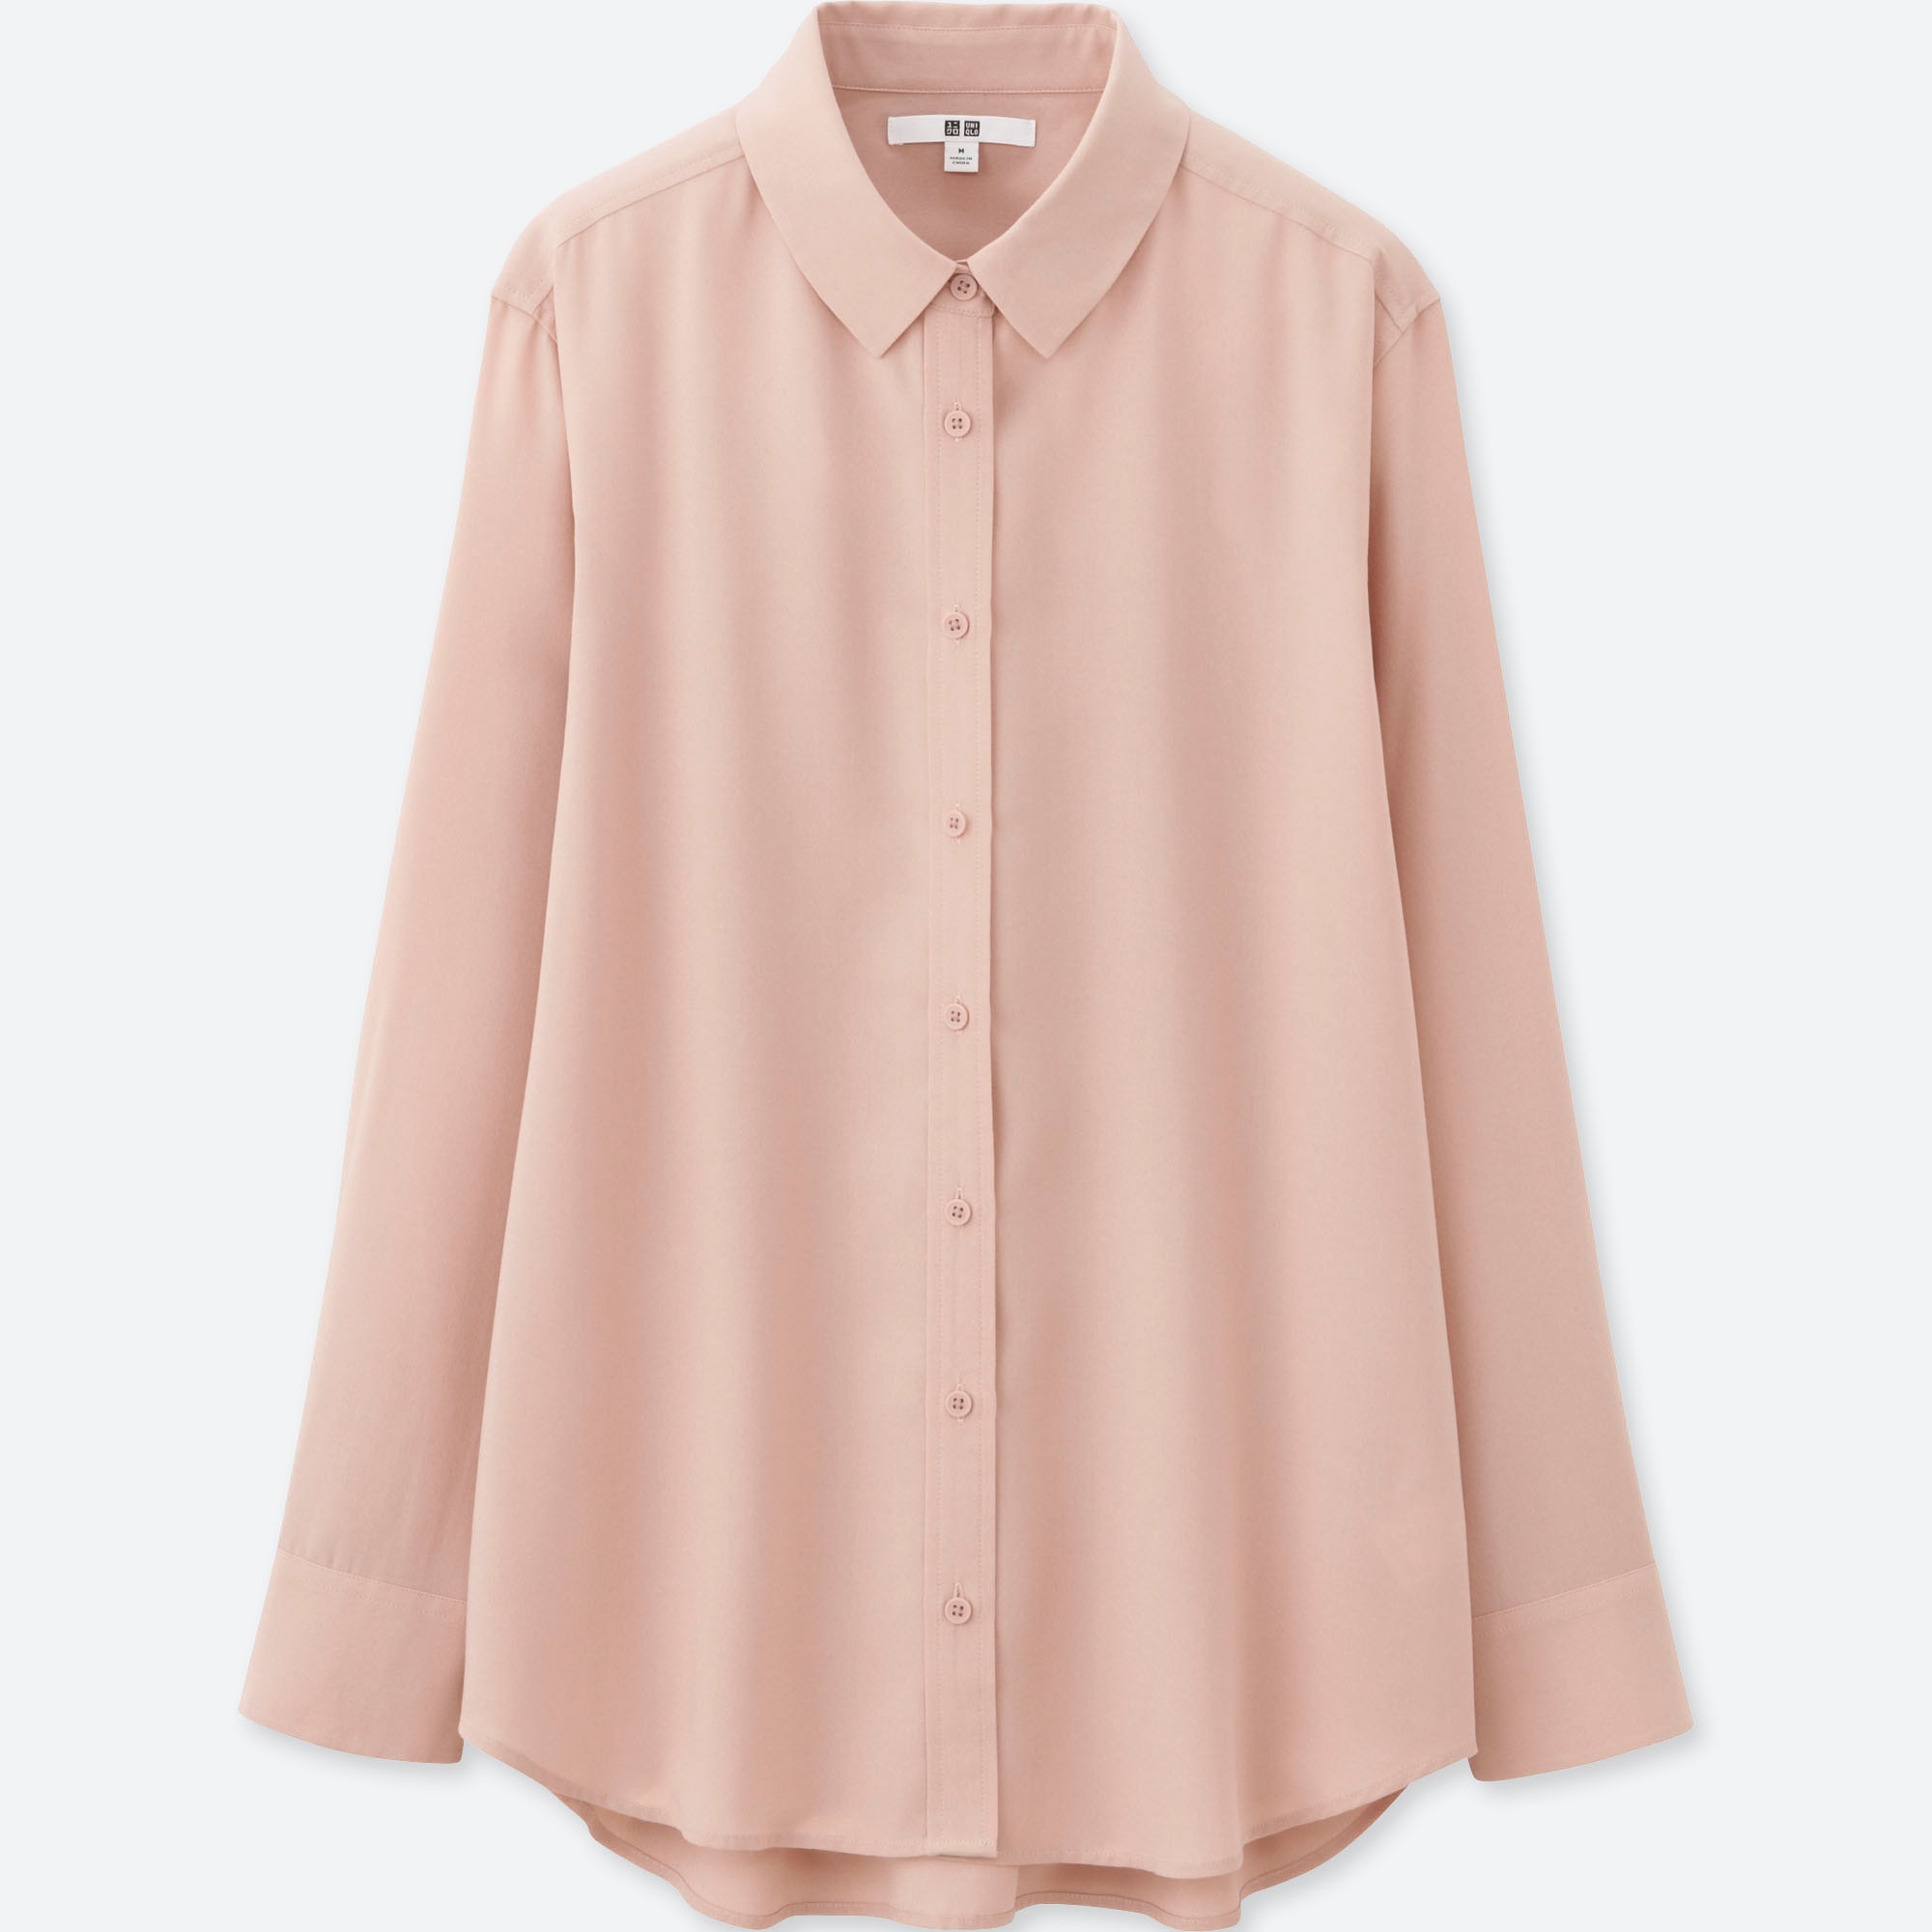 Fisher uniqlo rayon long sleeve blouse top wear